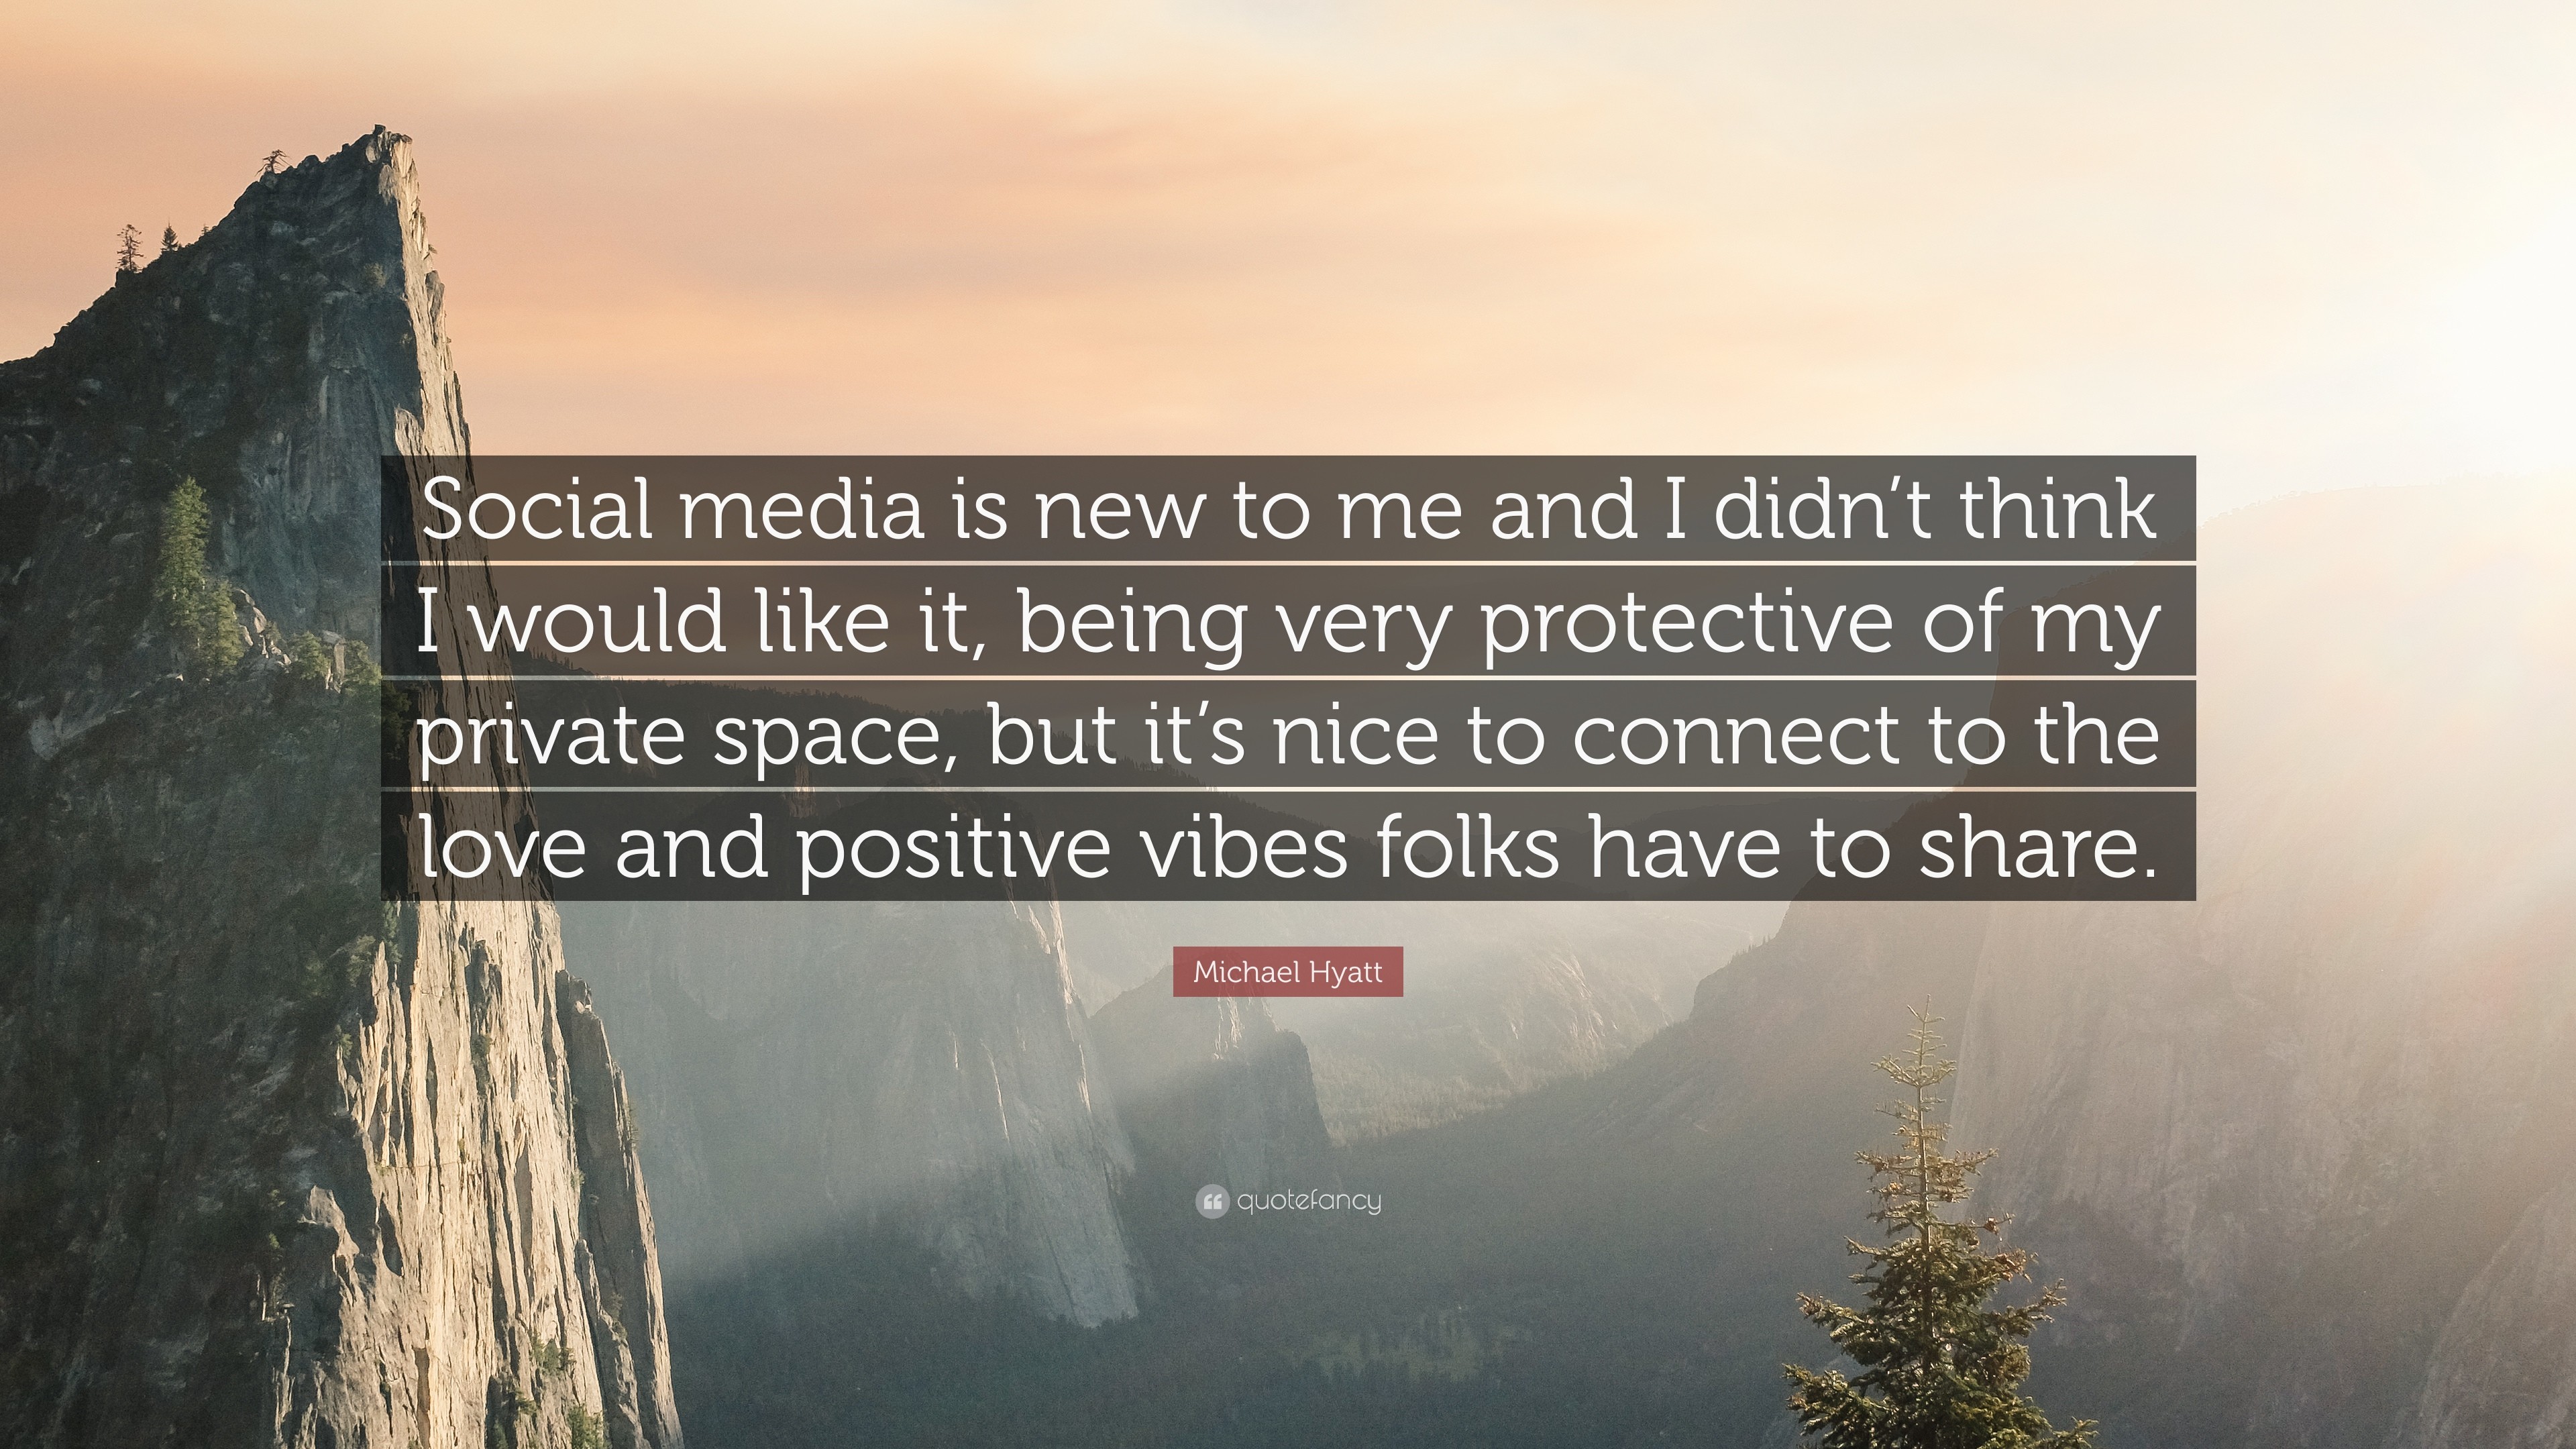 3840x2160 Michael Hyatt Quote: “Social media is new to me and I didn't